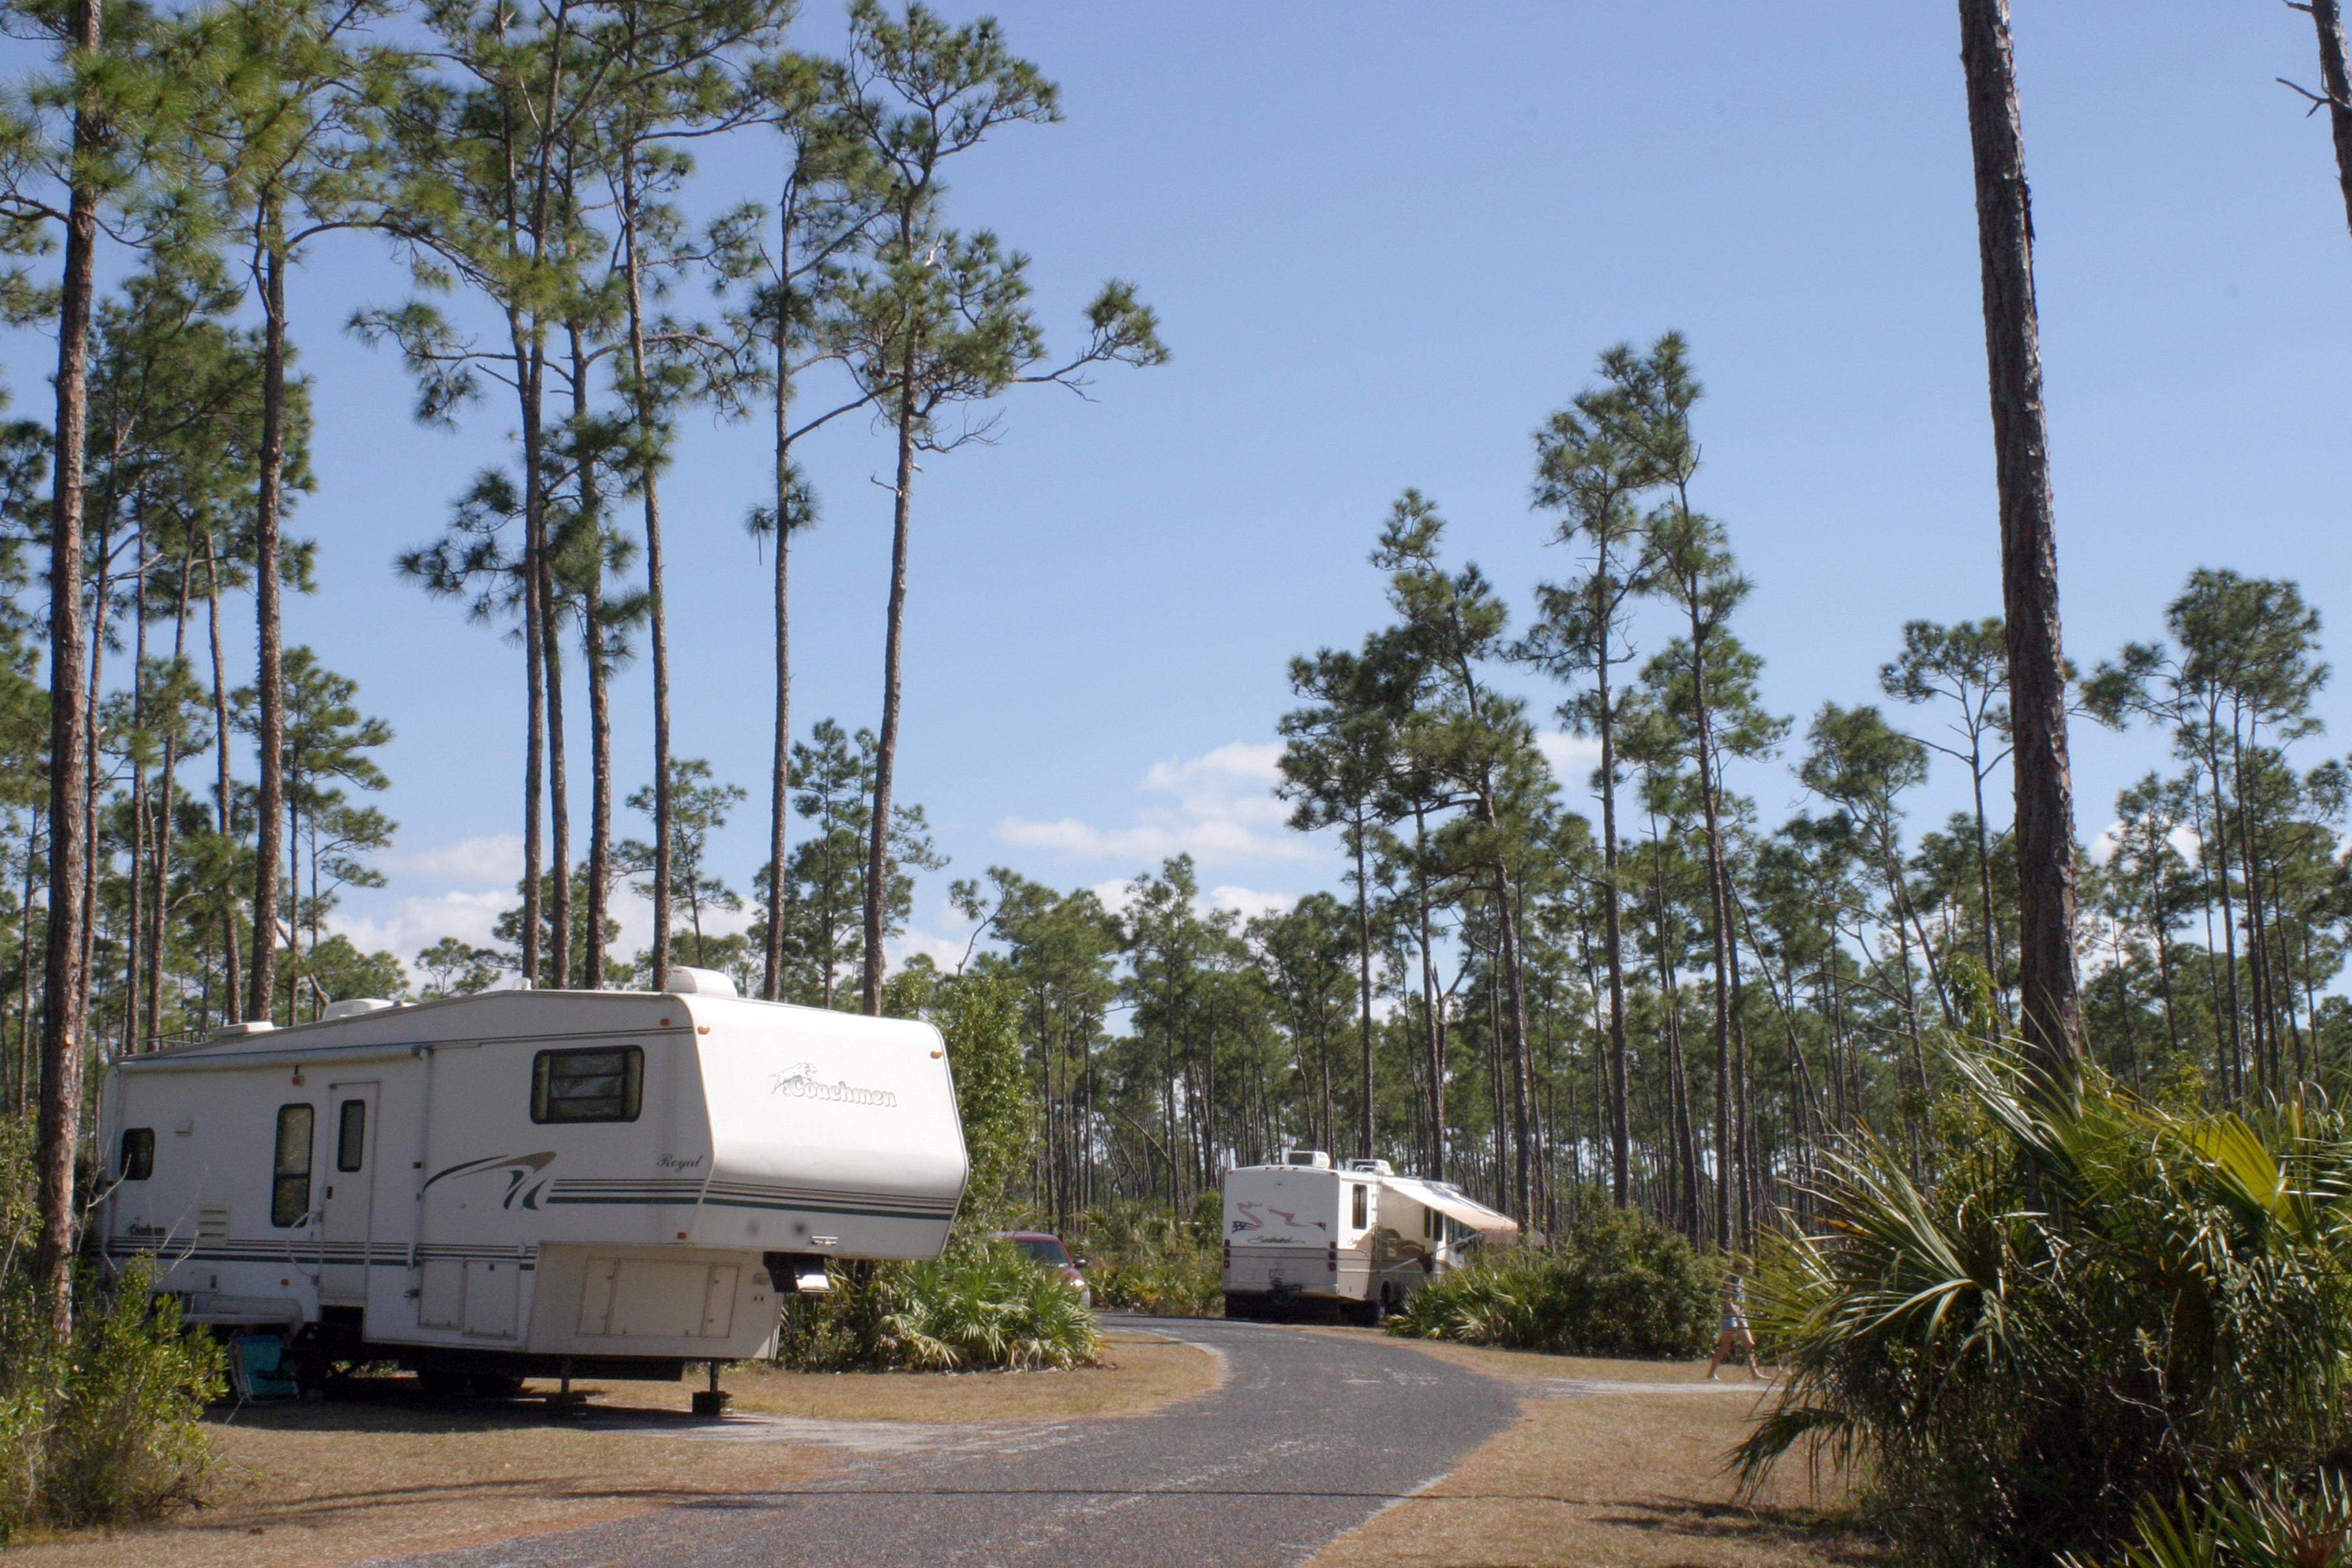 Two RV trailers parked at a campground surrounded by tall slash pine trees.